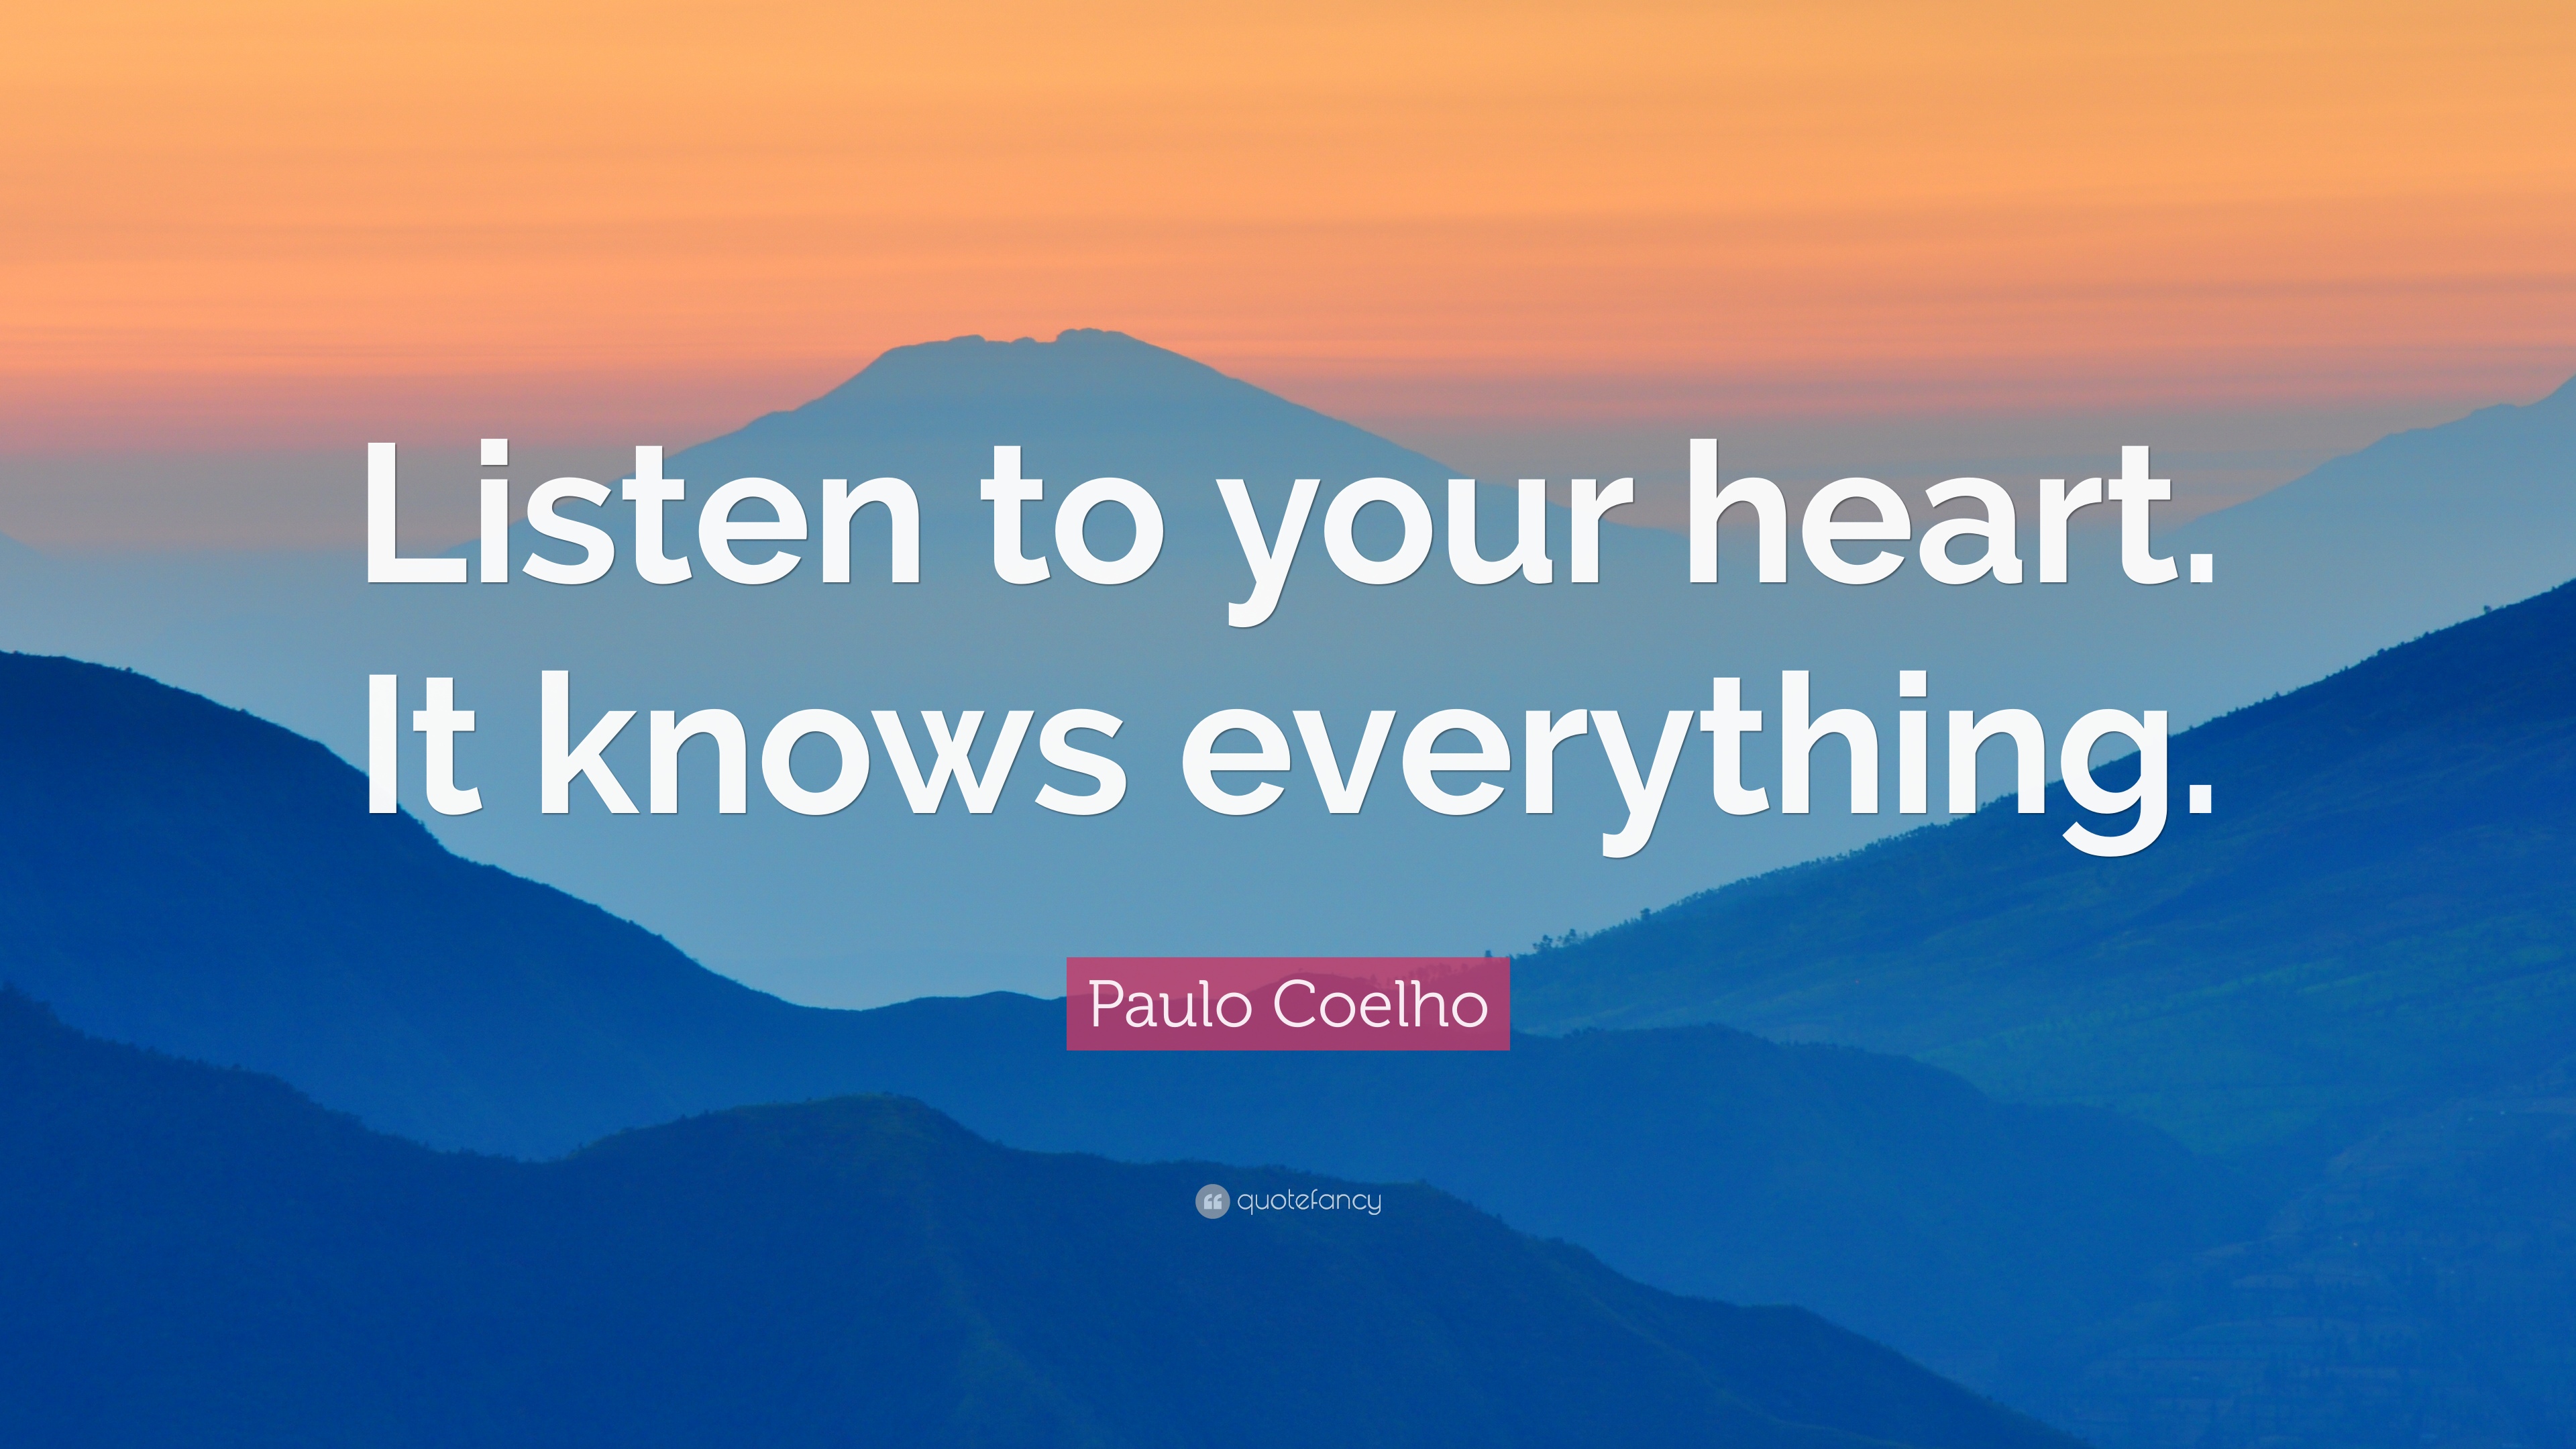 Paulo Coelho Quote: “Listen to your heart. It knows everything.” 12